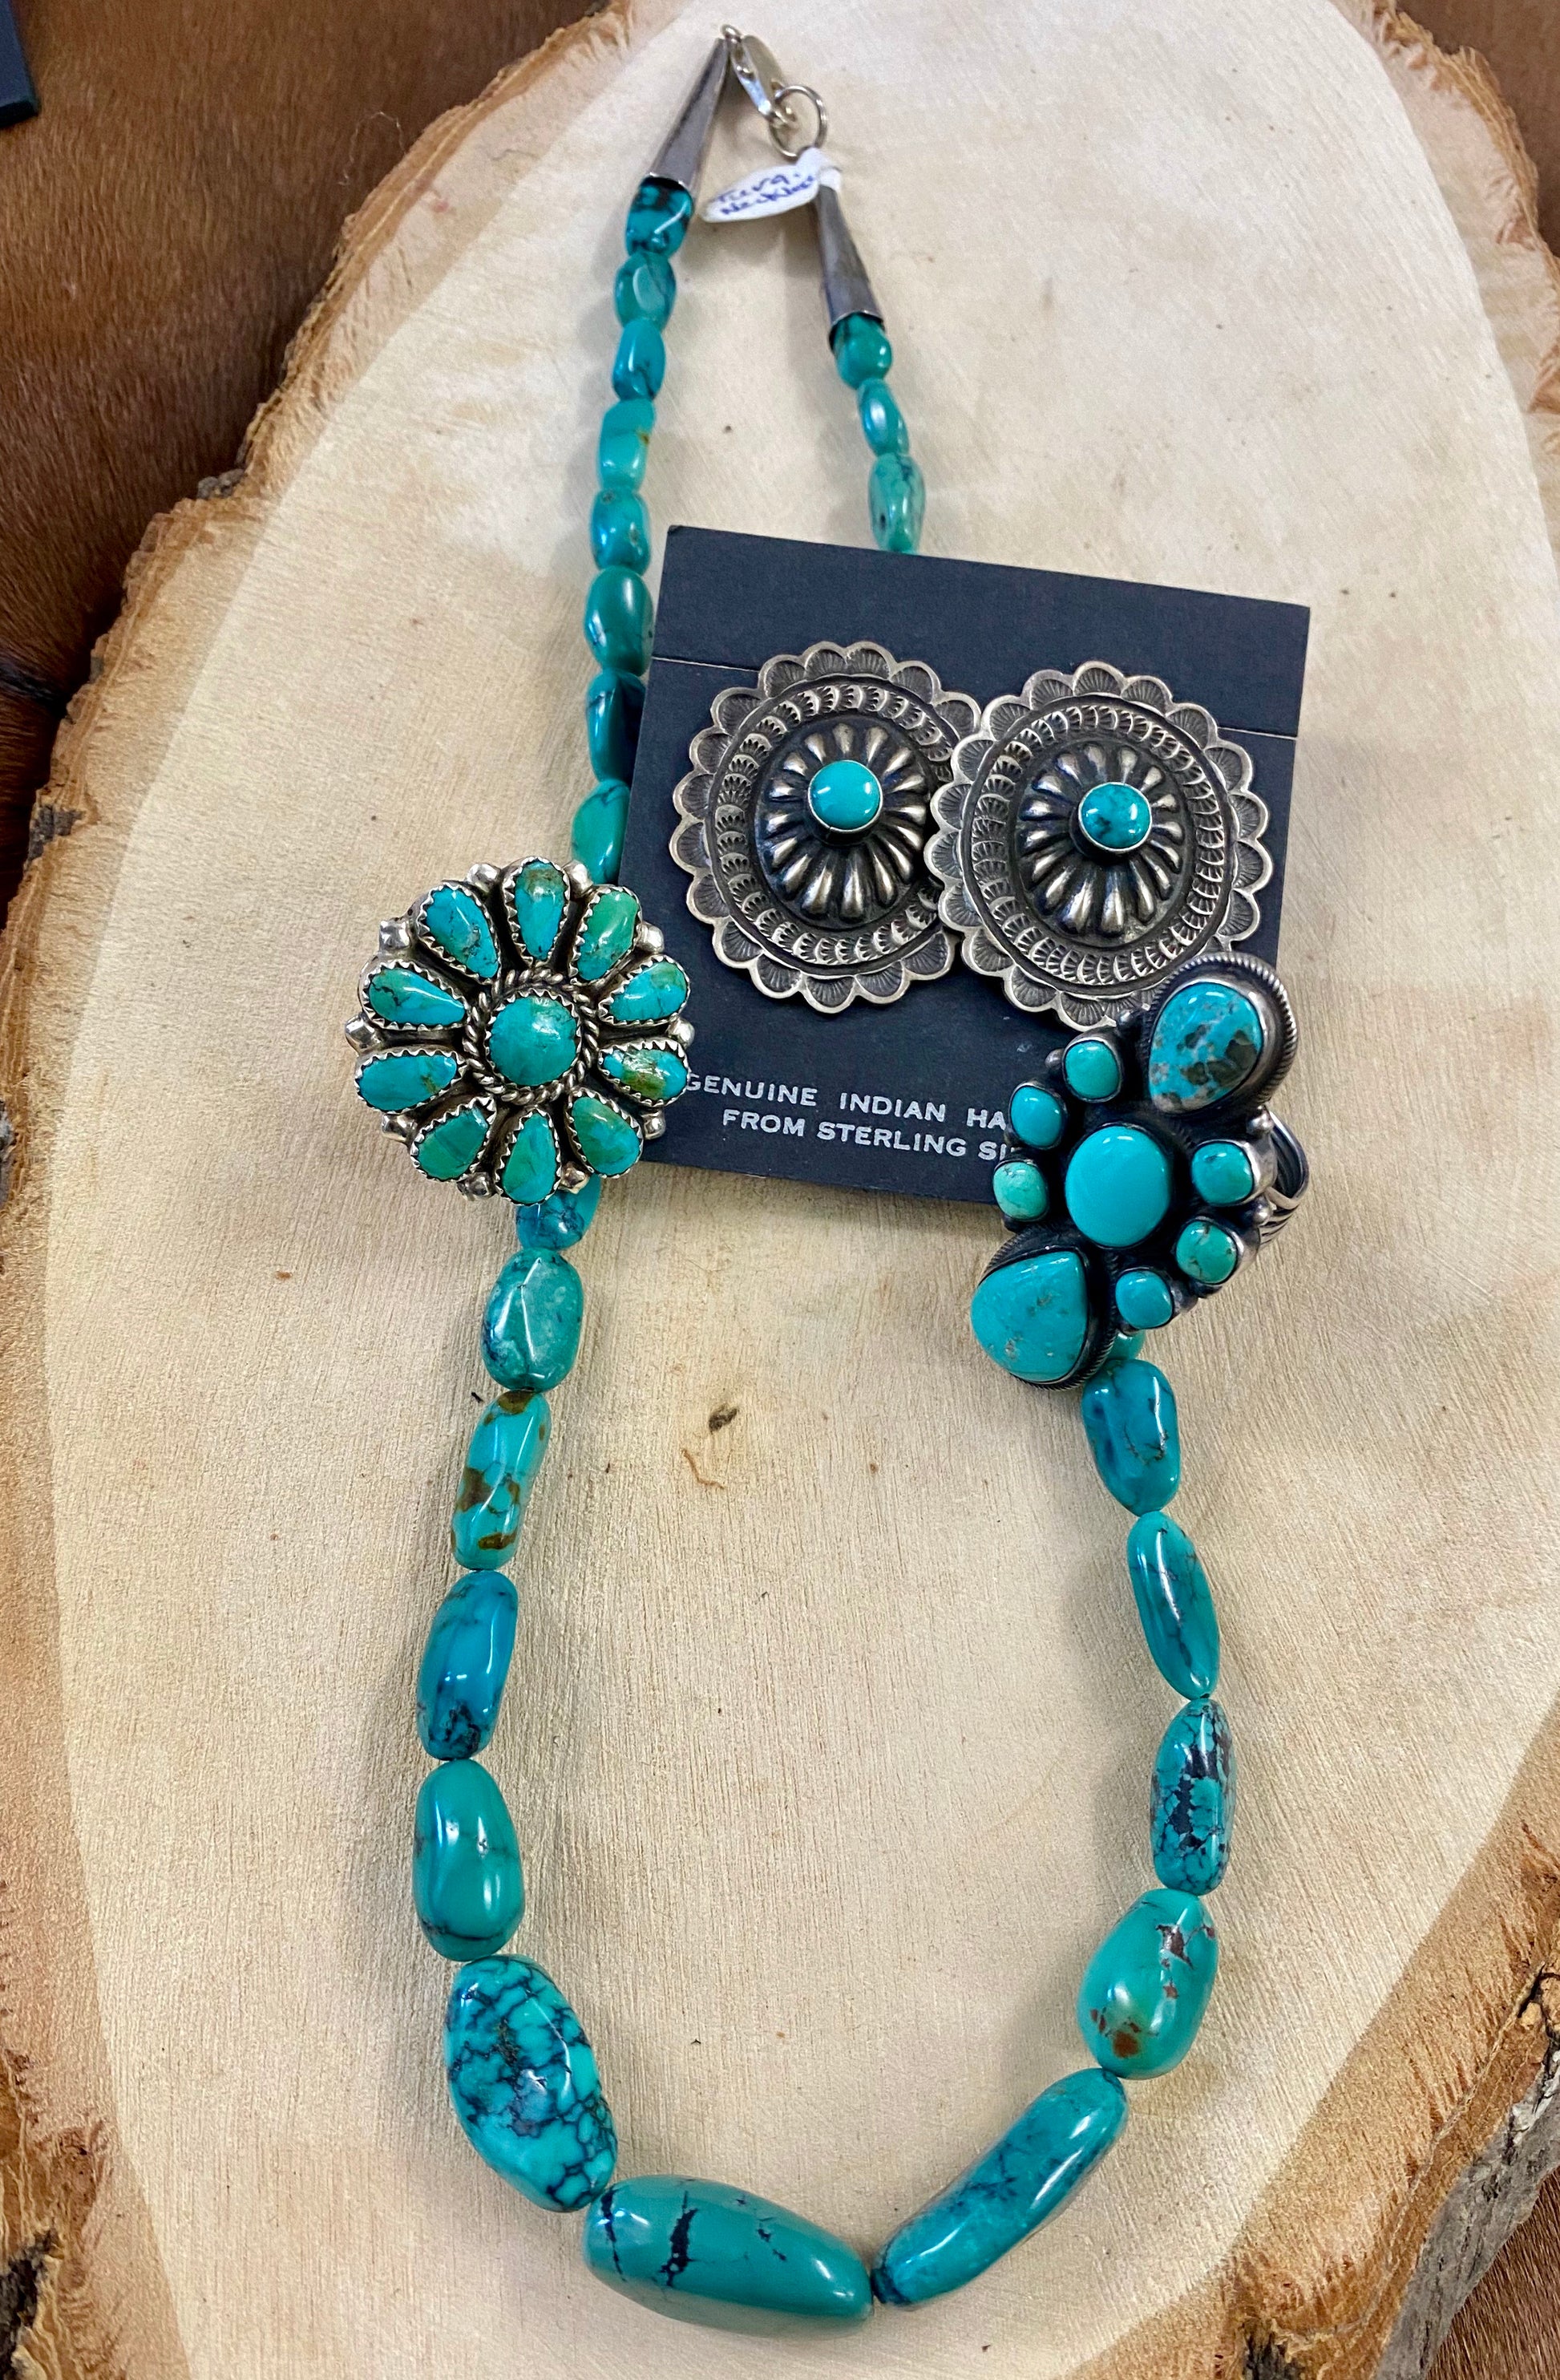 Native American Made Sterling Silver Concho Earrings With Turquoise  Authentic large post concho style sterling silver earrings with turquoise. Stamped sterling and signed by Native American artist silversmith on the back inside the indent of the earrings. 